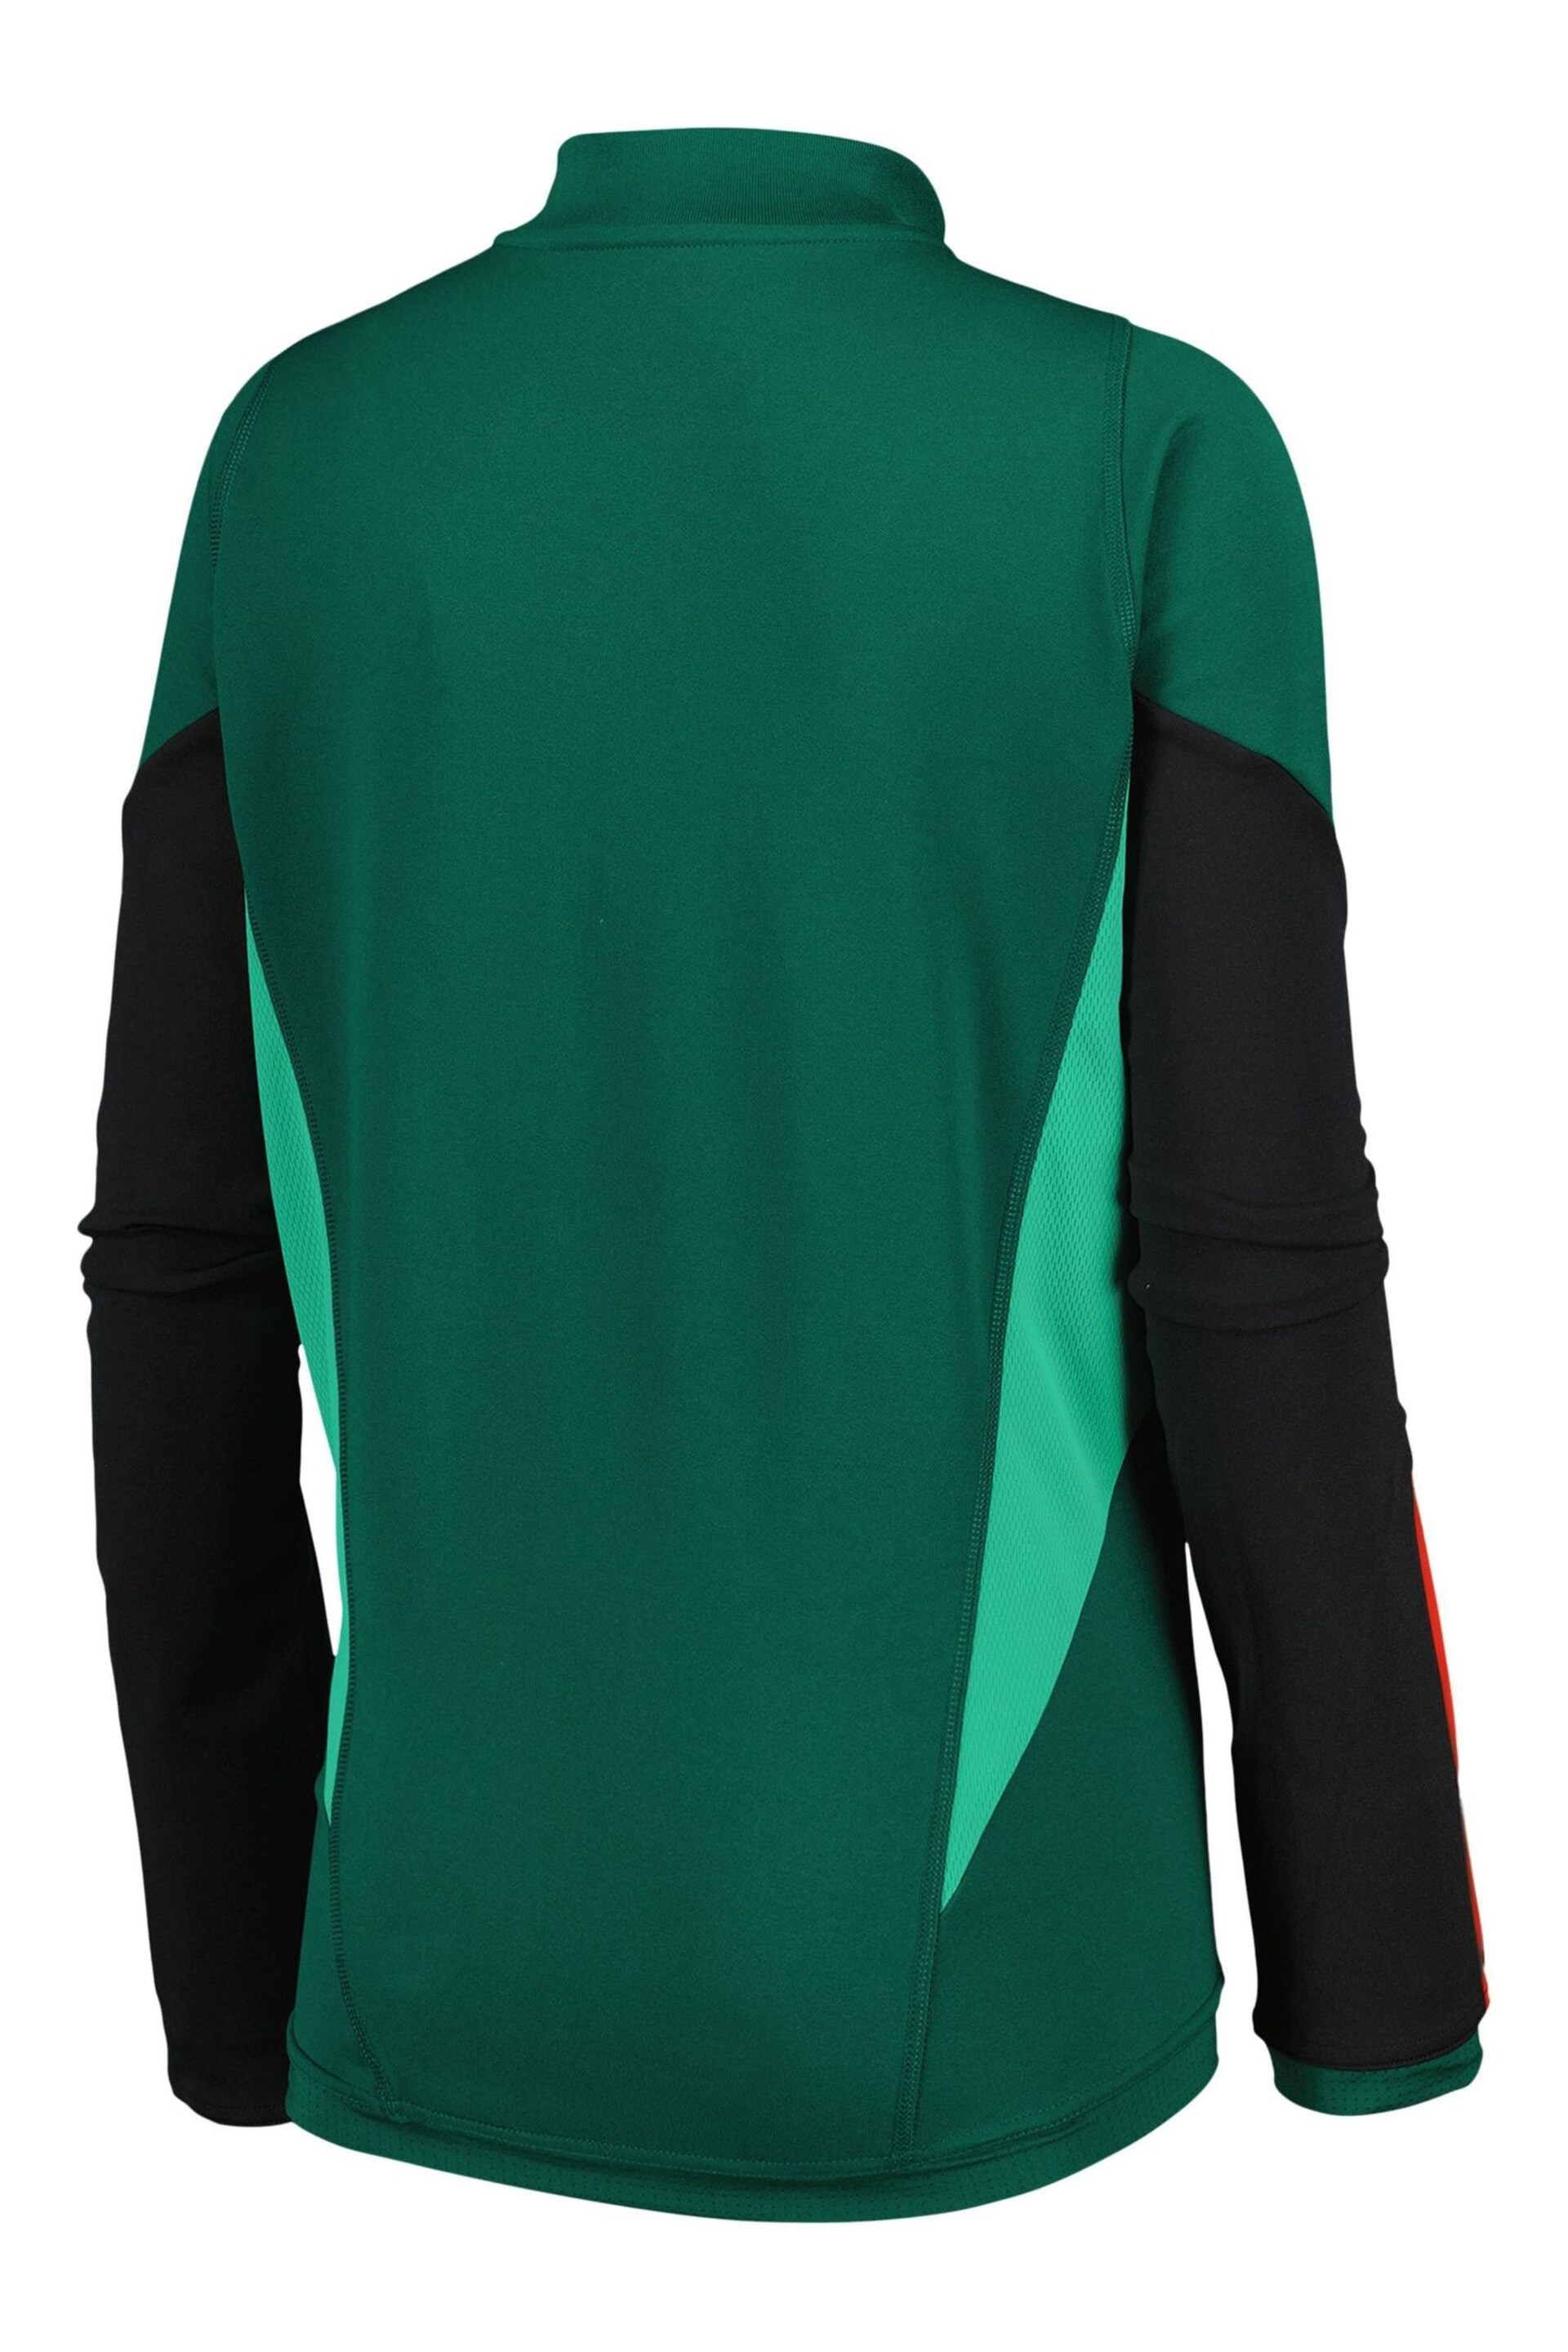 adidas Green Manchester United Training Top Womens - Image 3 of 3